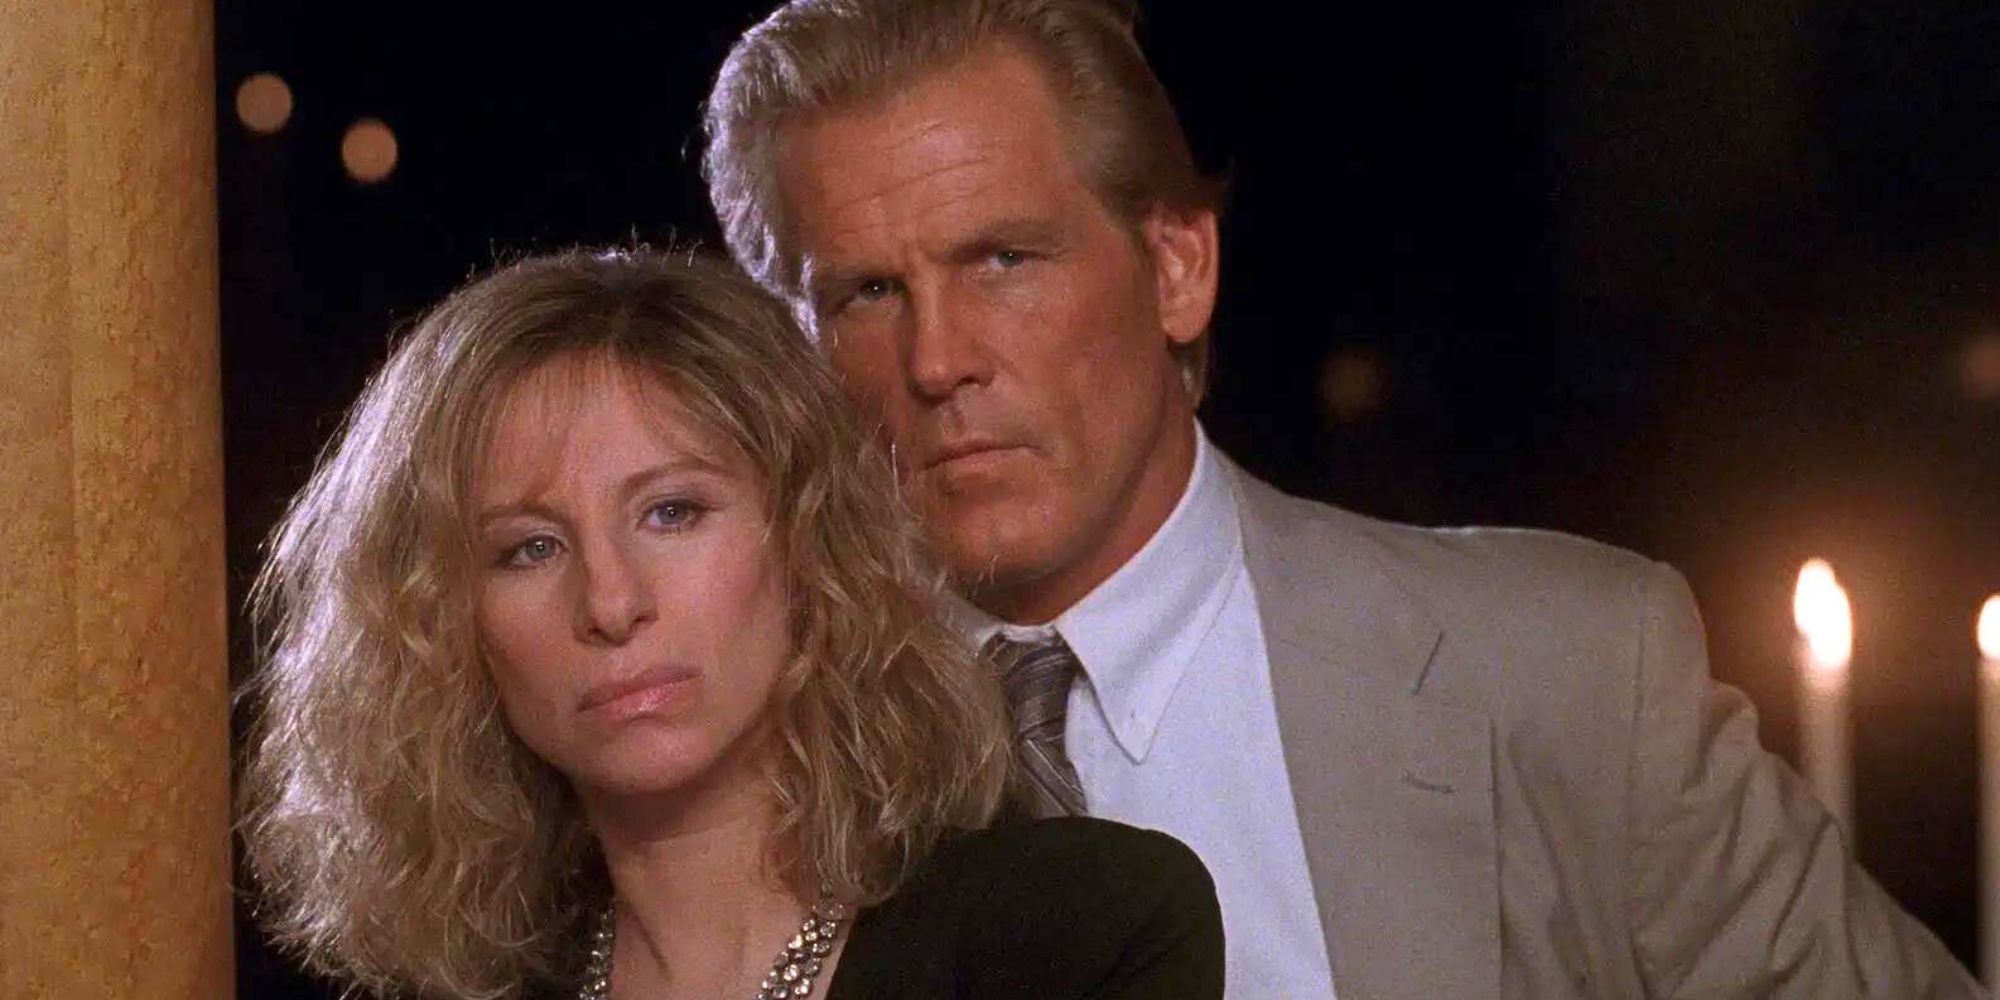 Barbra Streisand standing in front of Nick Nolte in The Prince of Tides (1991)